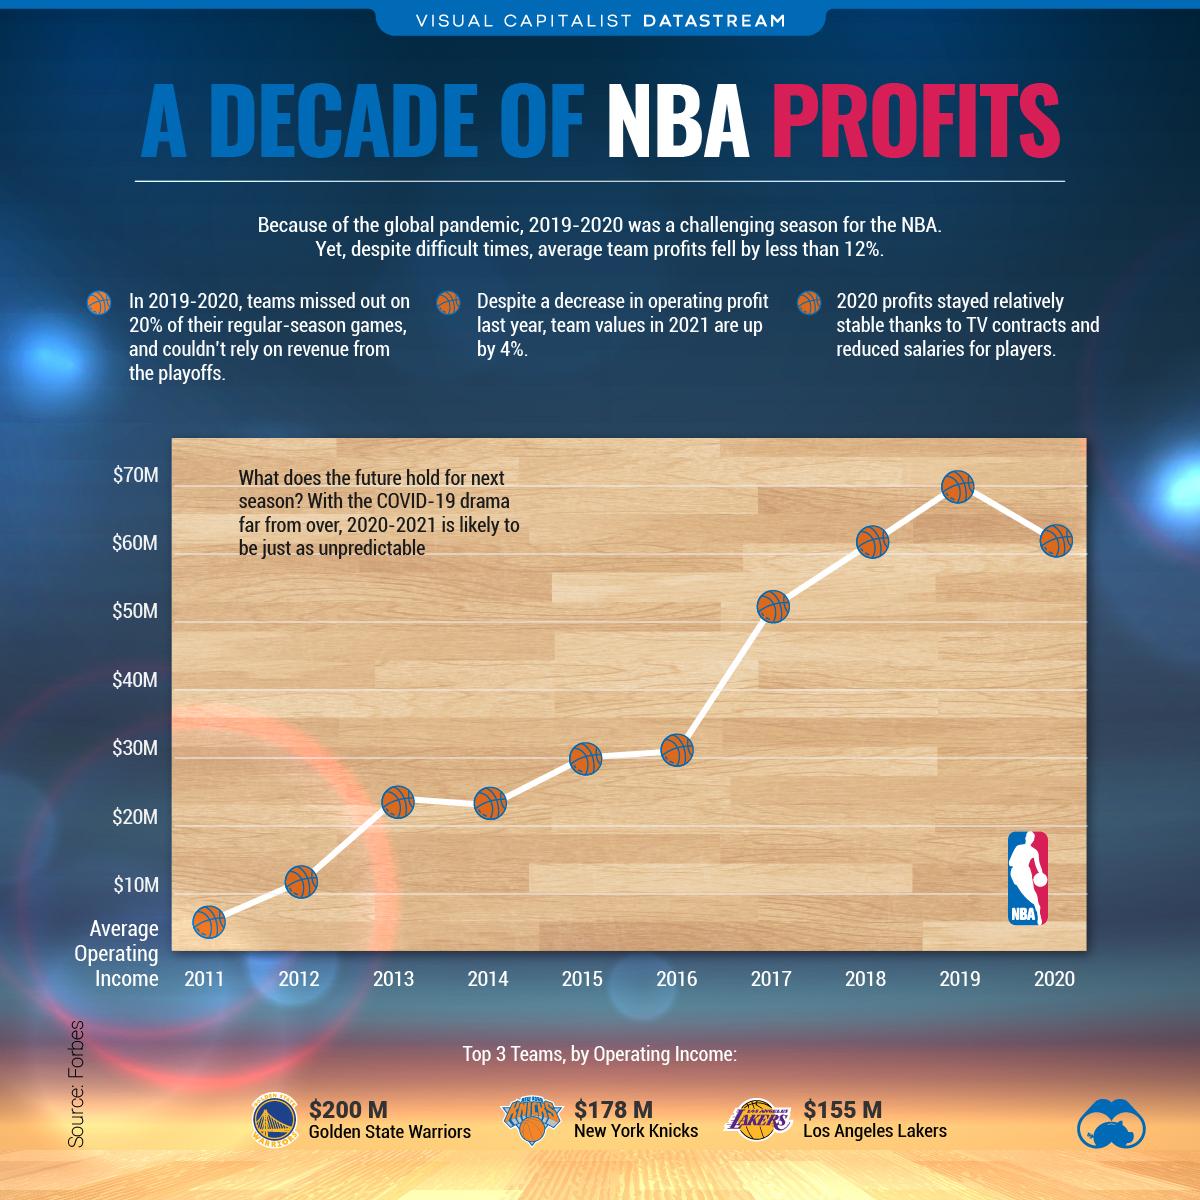 A Decade of NBA Profit: How Did the League Fare in 2020?